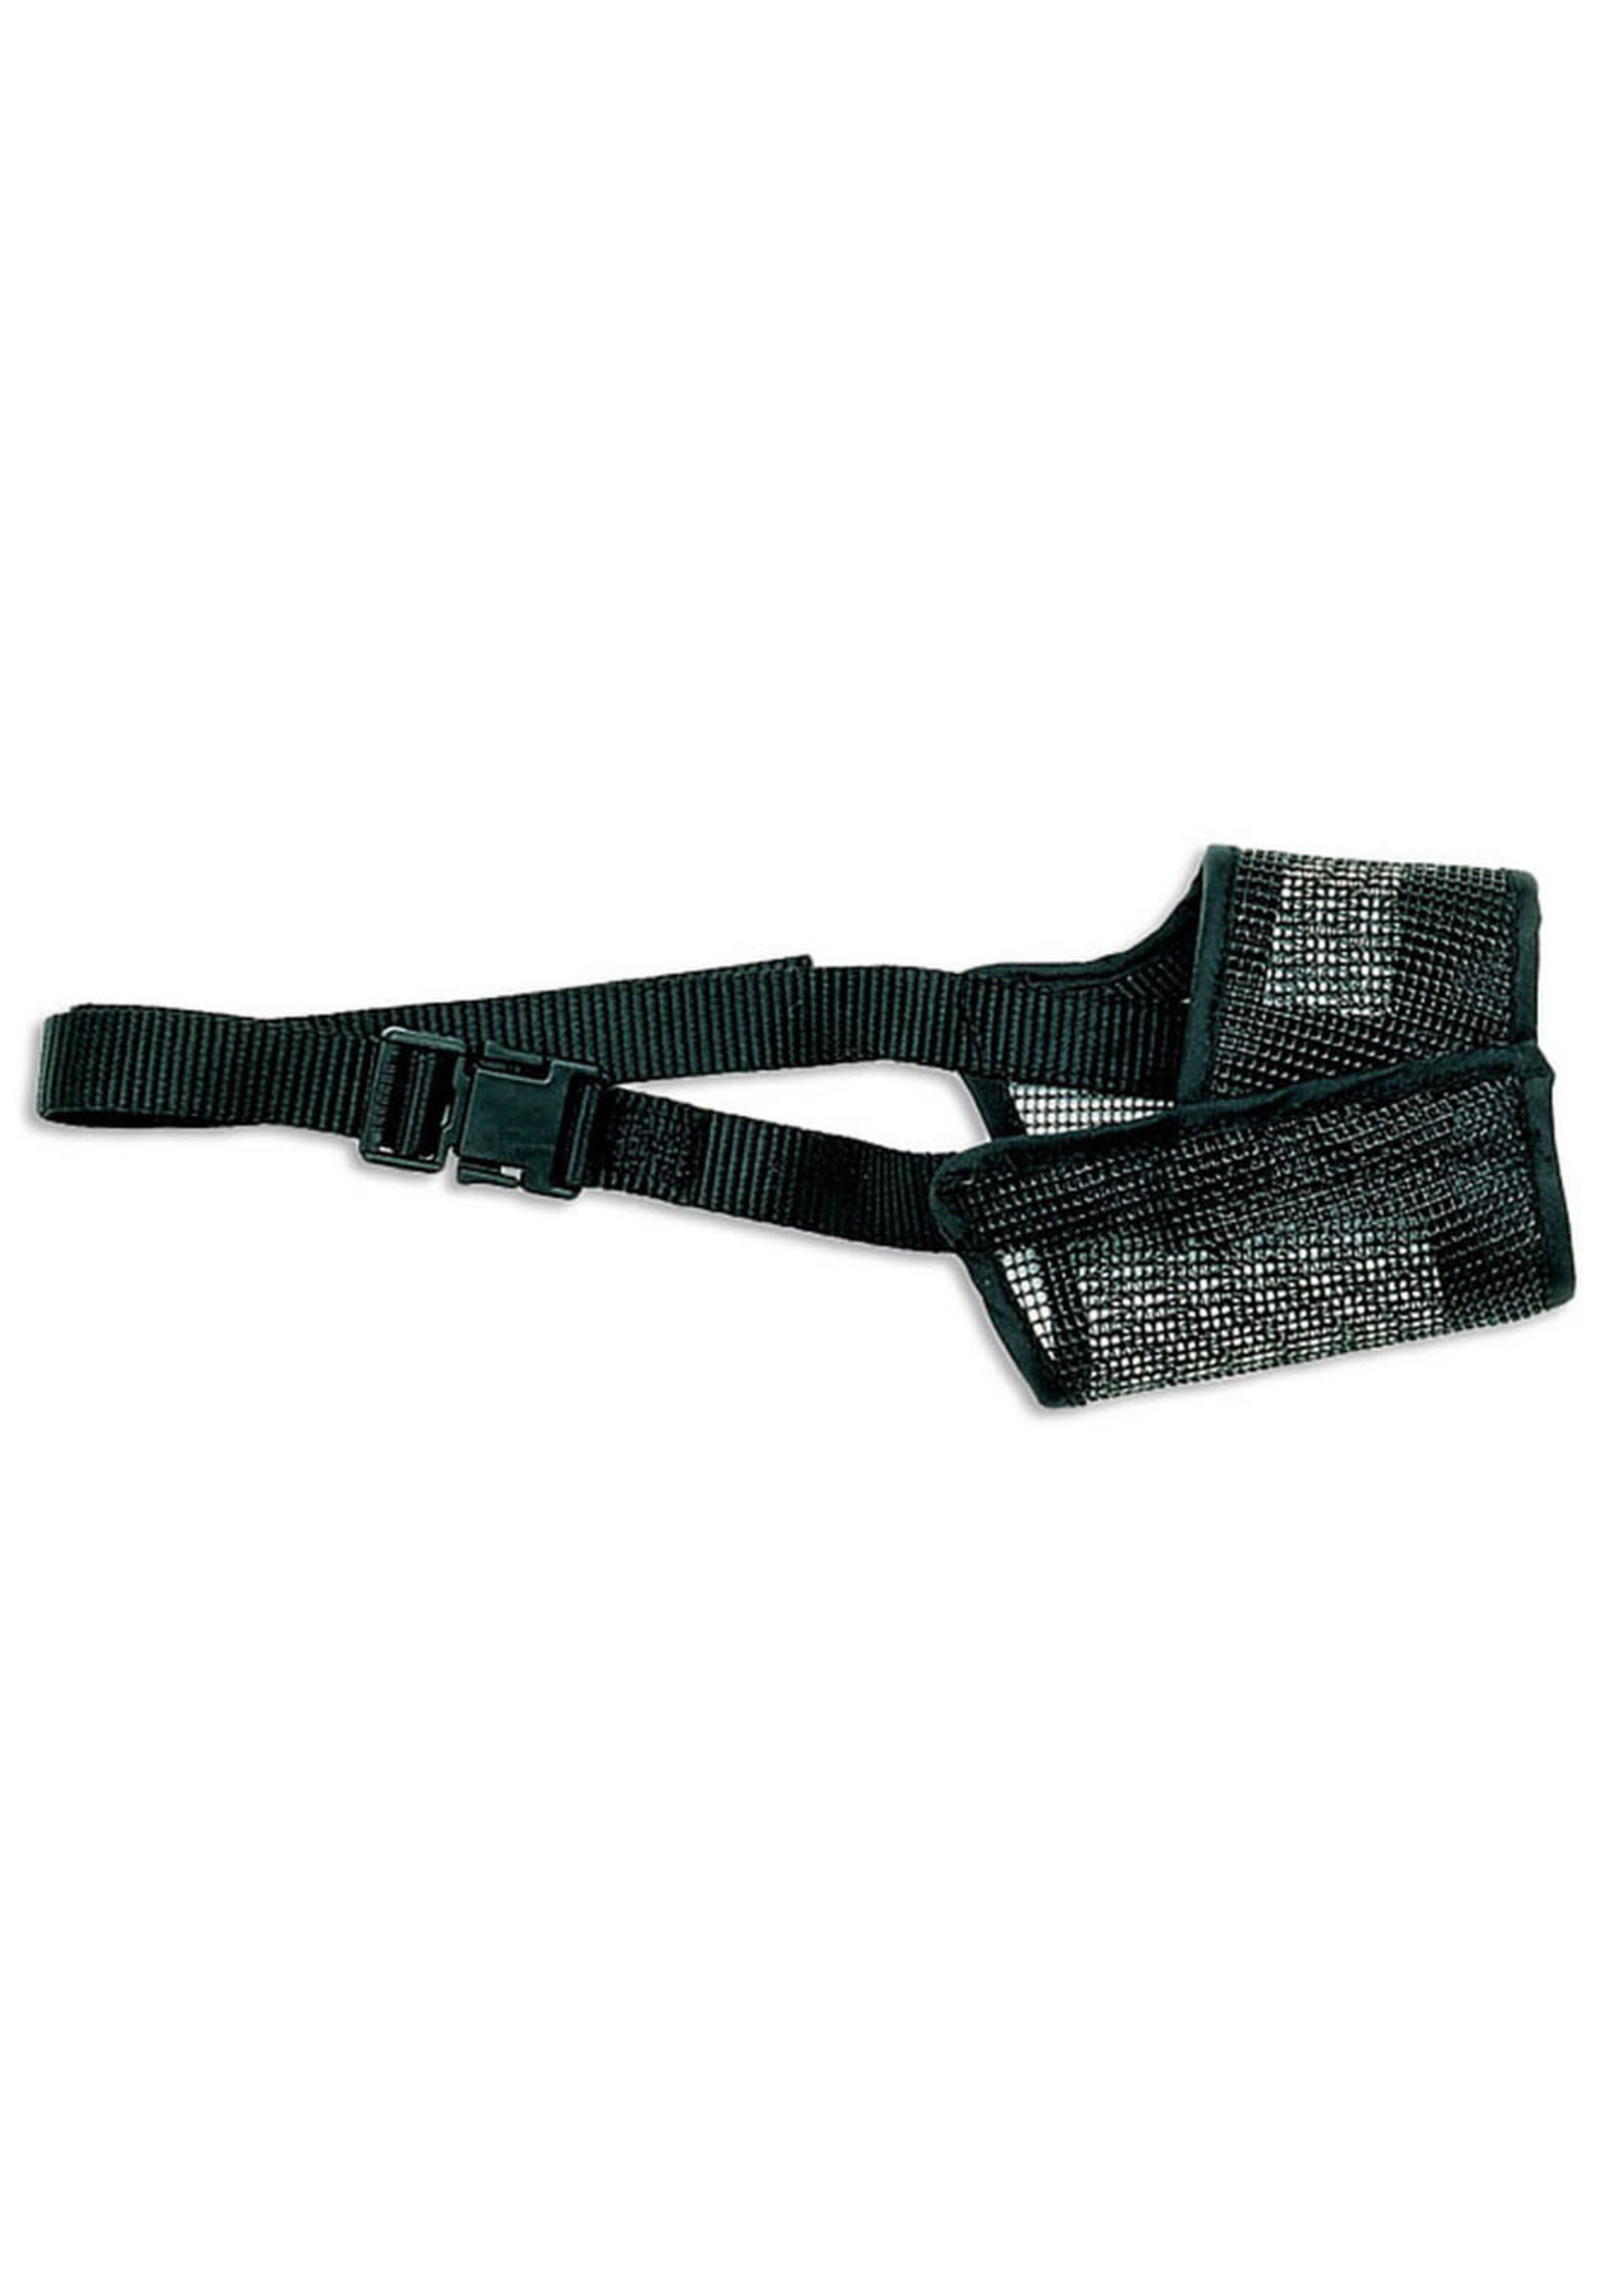 Coastal Pet Coastal Best Fit Mesh Muzzle Restraint Size 8 / https://ahp-pet-amp-grooming.shoplightspeed.com/admin/products/paginate?dir=next&query=coastal&offset=23&product_id=47629485Large Short Nosed Breeds  NEW